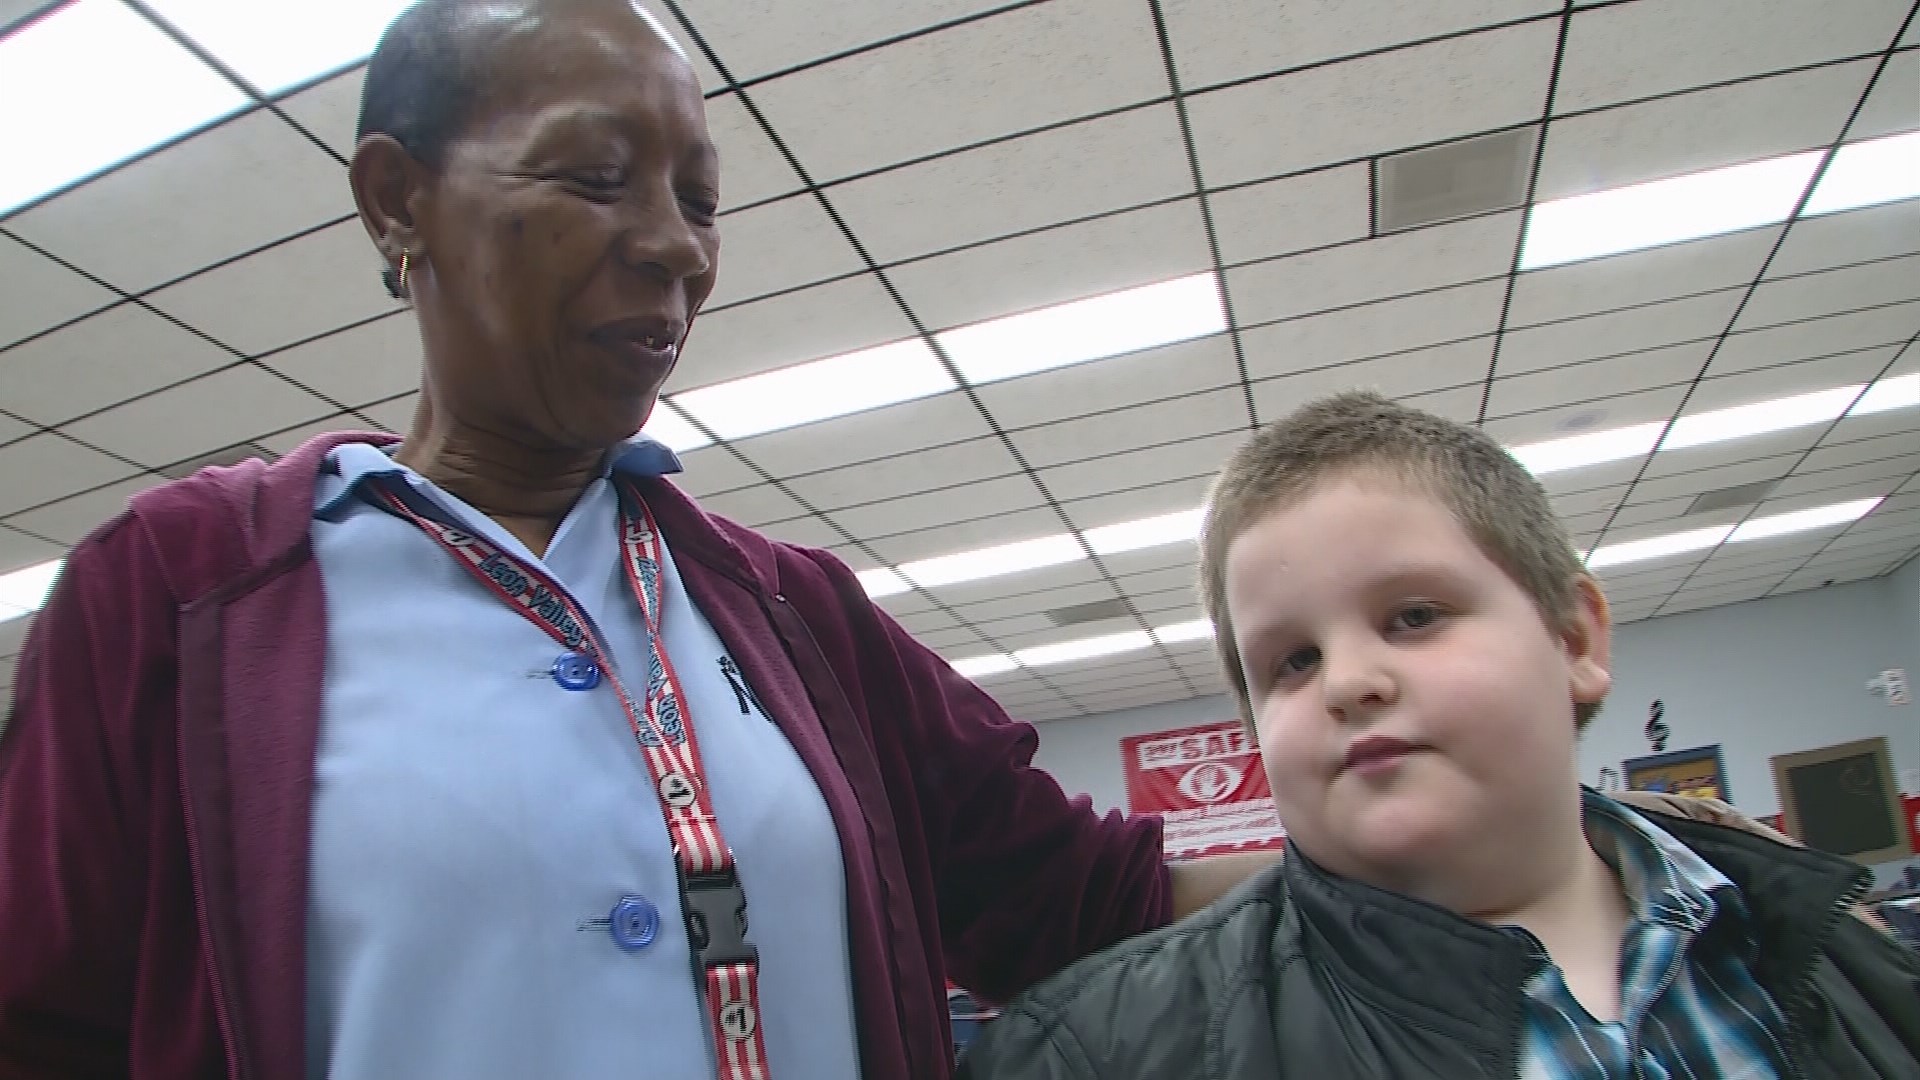 Custodian saves student from choking, Local News